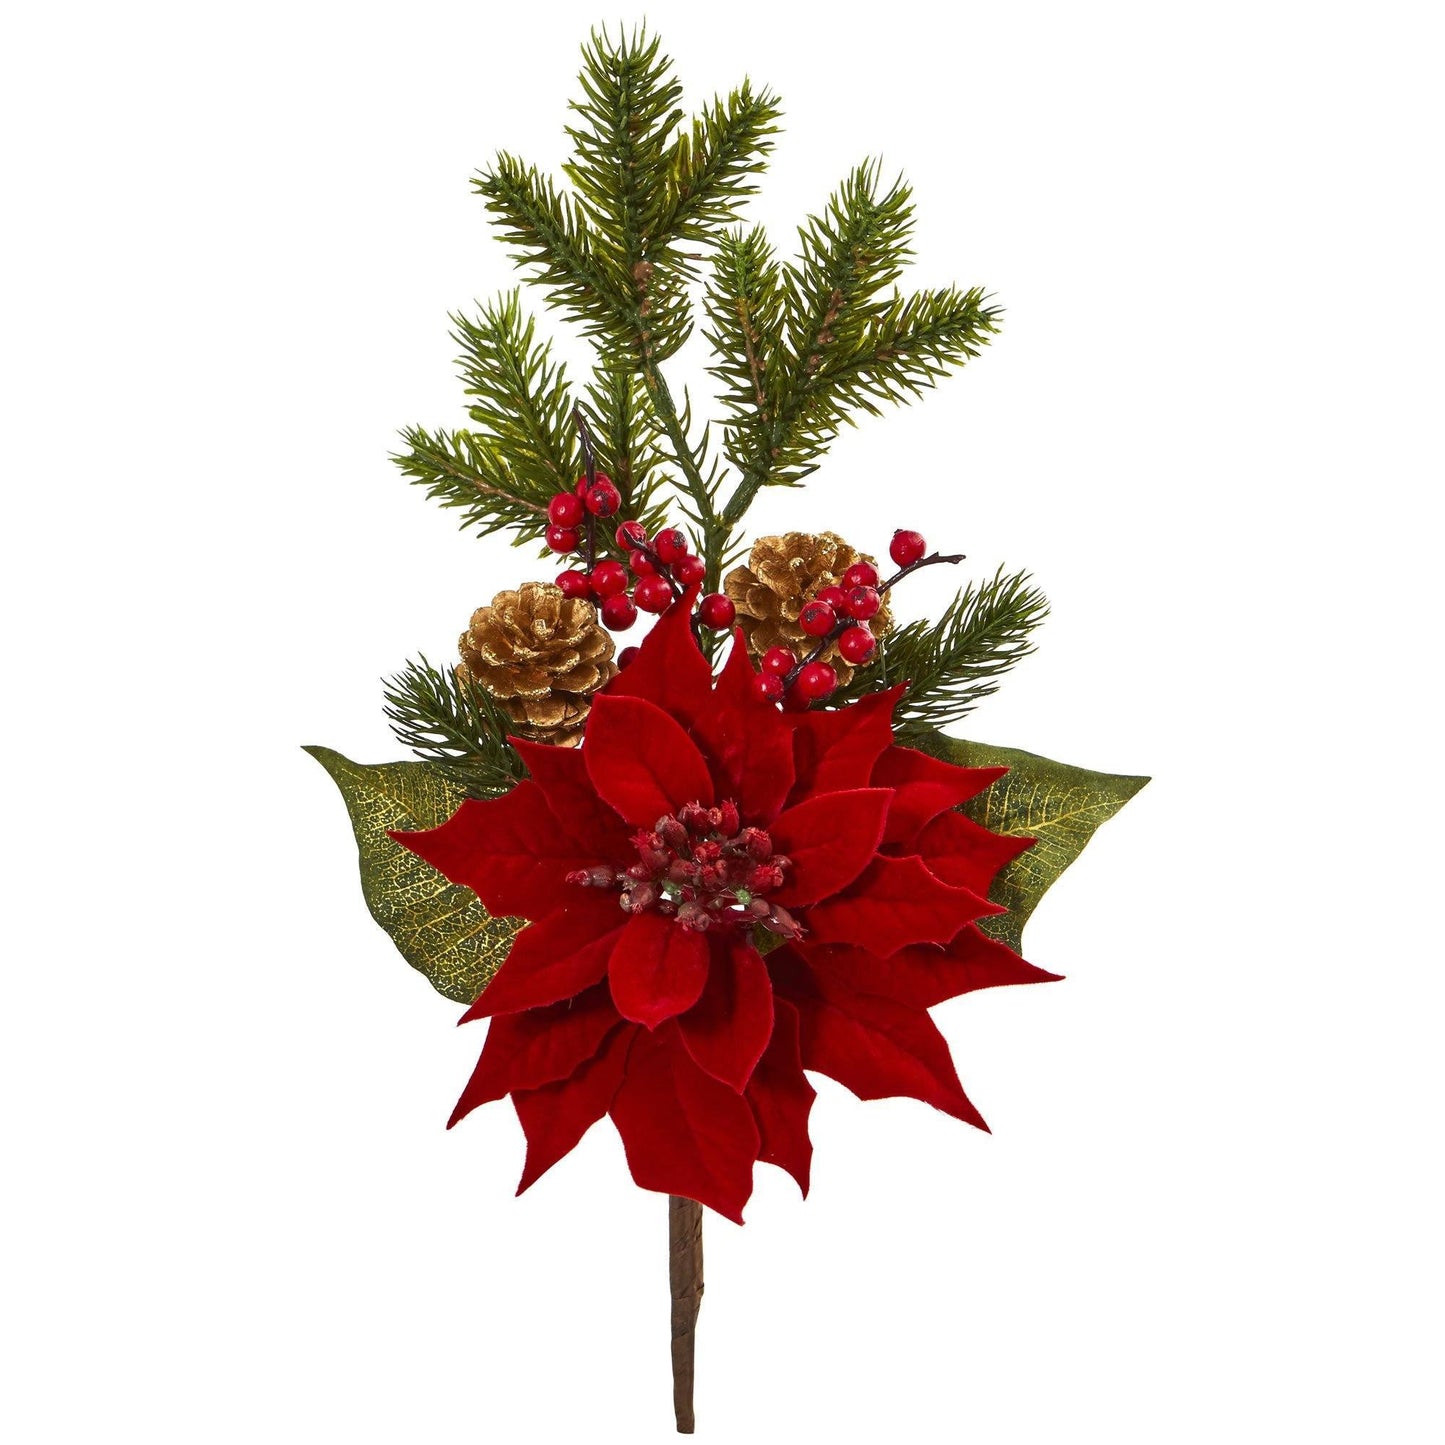 17” Poinsettia, Berry and Pine Artificial Flower Bundle (Set of 6) by Nearly Natural